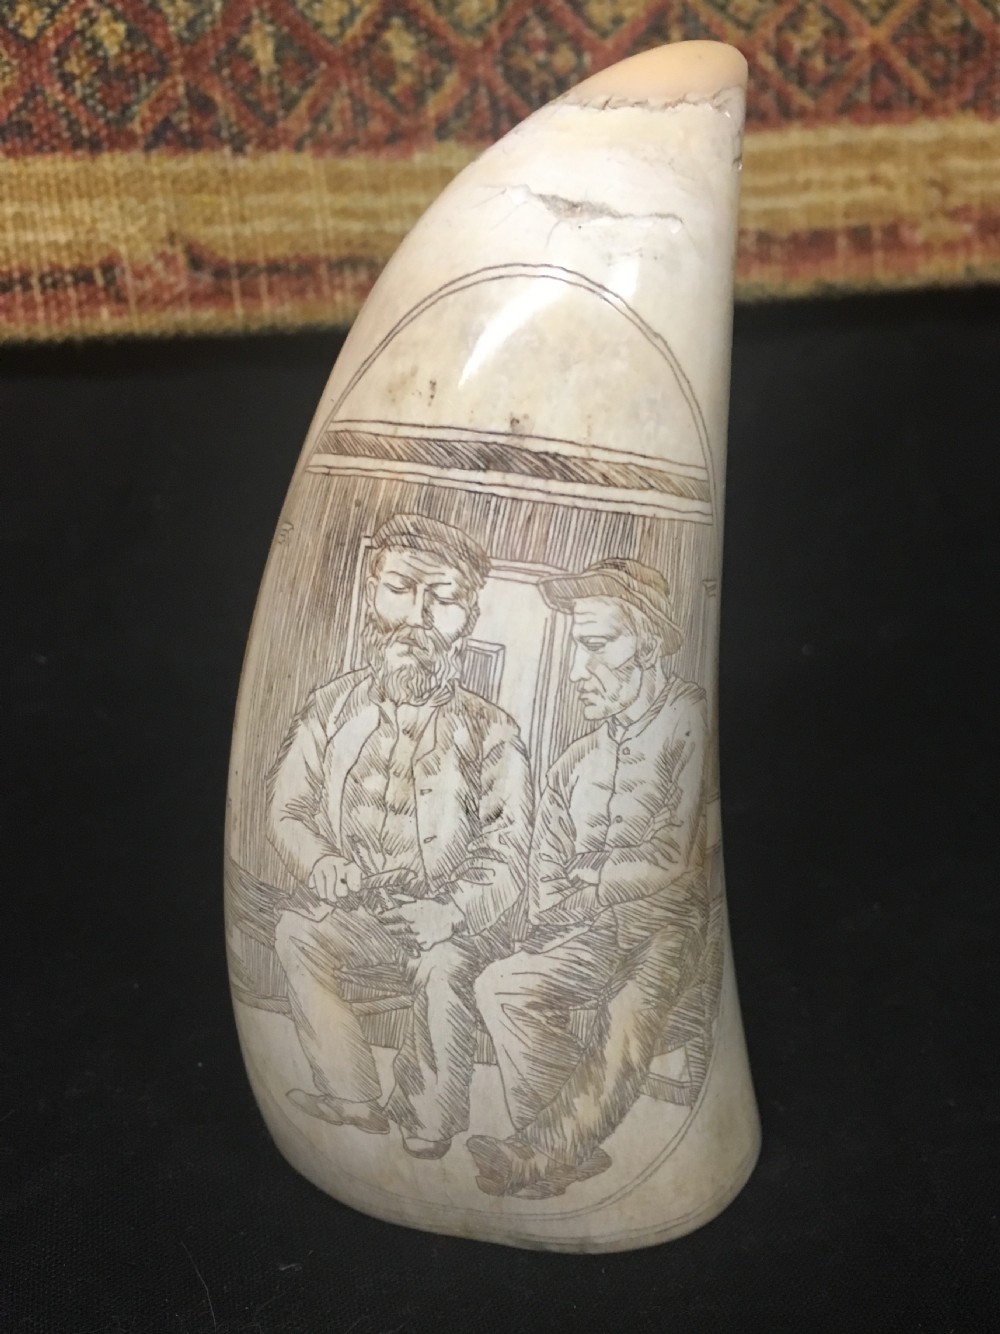 c19th scrimshaw on a whales tooth